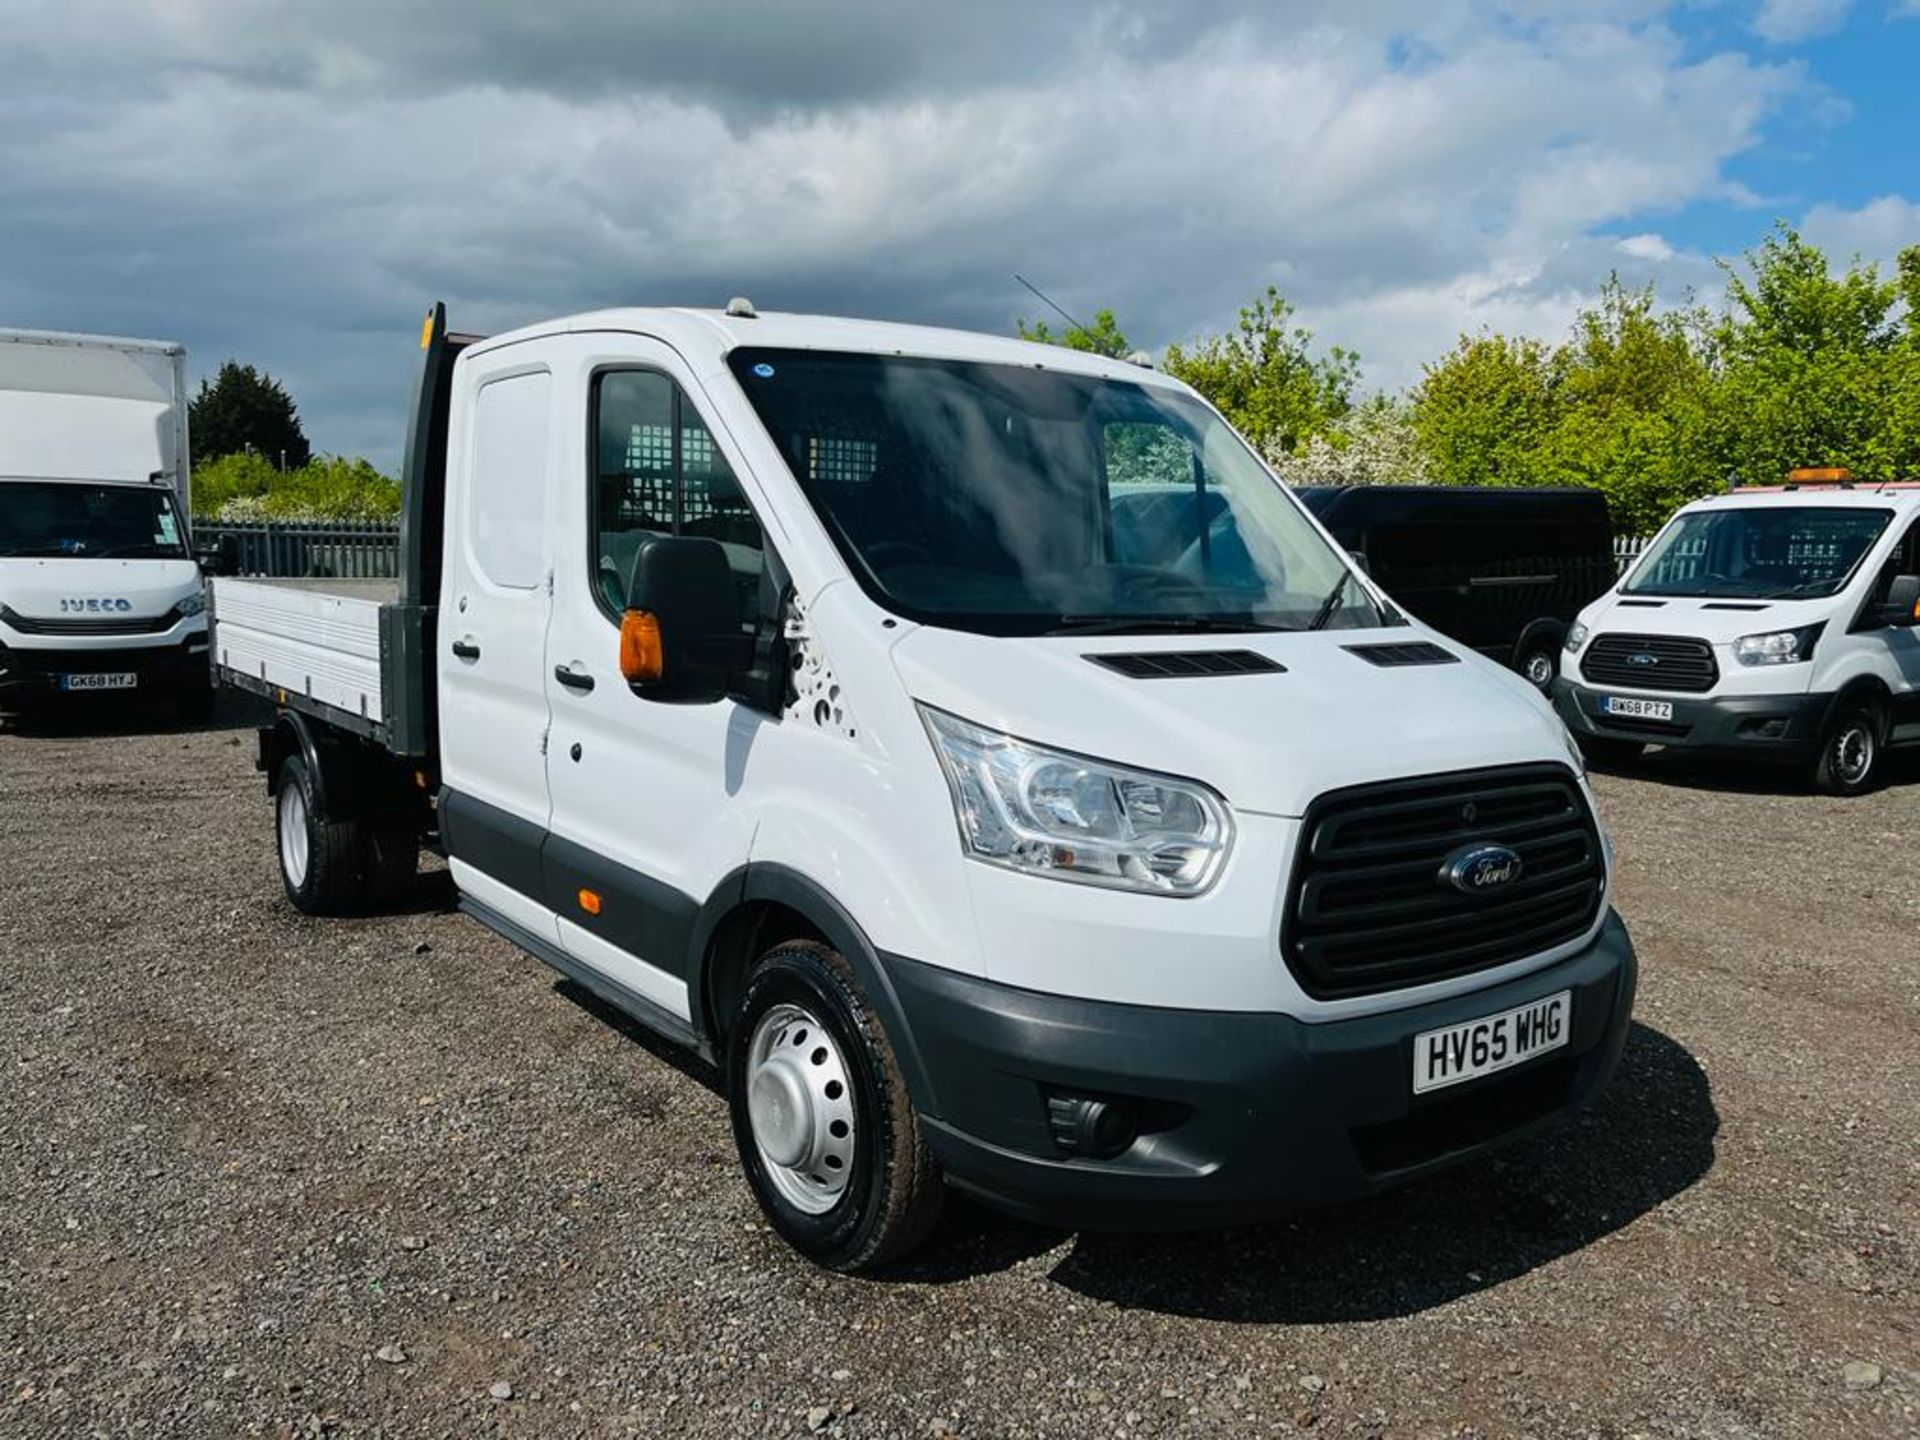 ** ON SALE ** Ford Transit 2.2 TDCI Double Cab Tipper 2015 '65 Reg' - Only 130,298 Miles